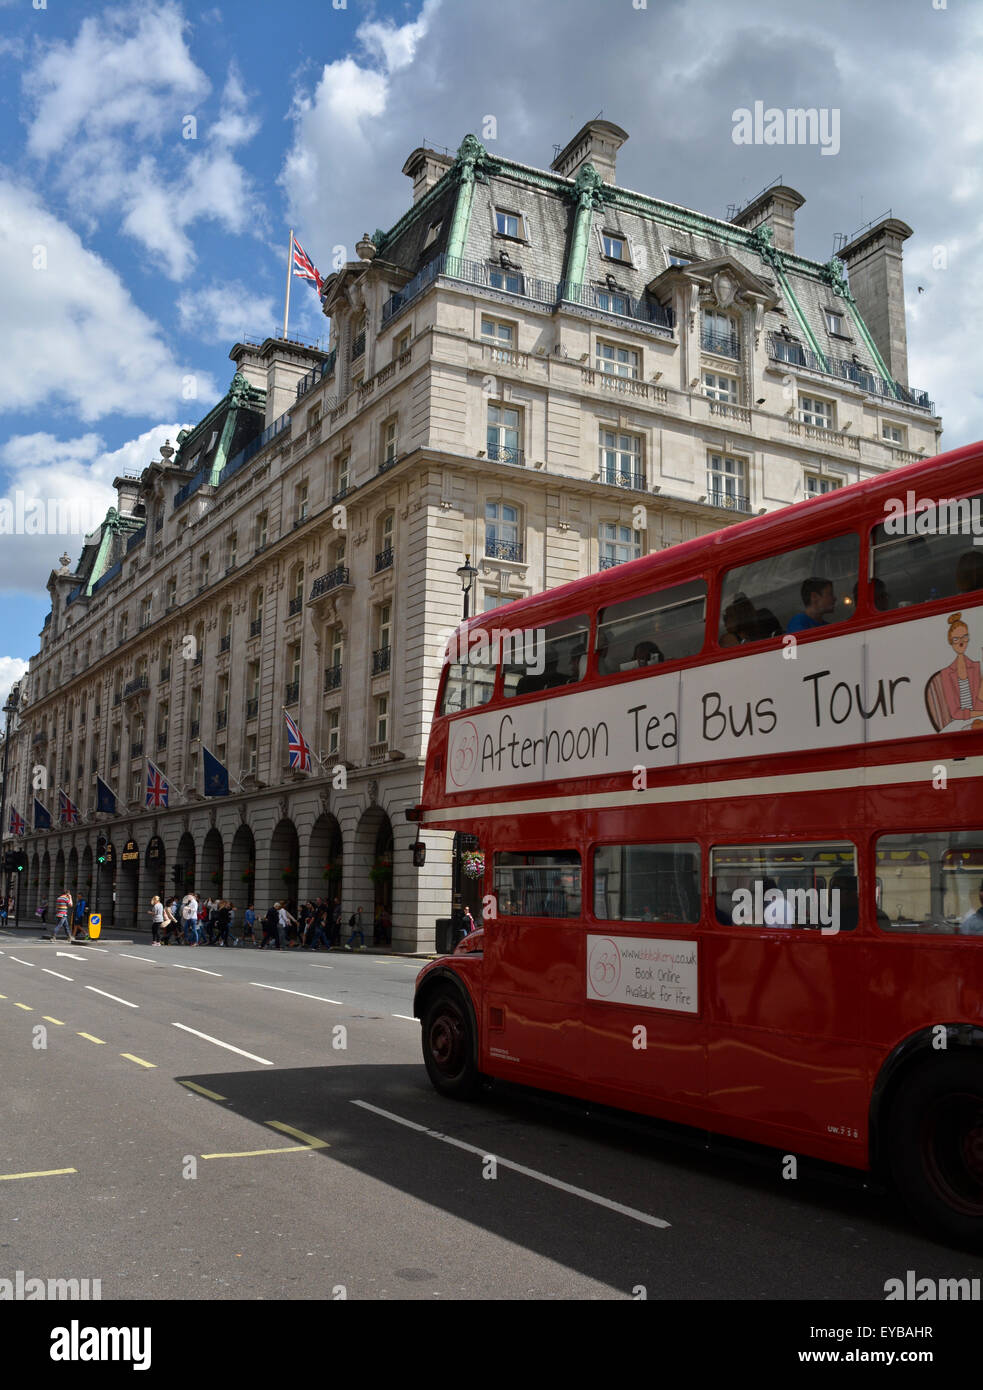 An afternoon tea Routemaster bus tour passes in front of The Ritz Hotel, London, UK Stock Photo